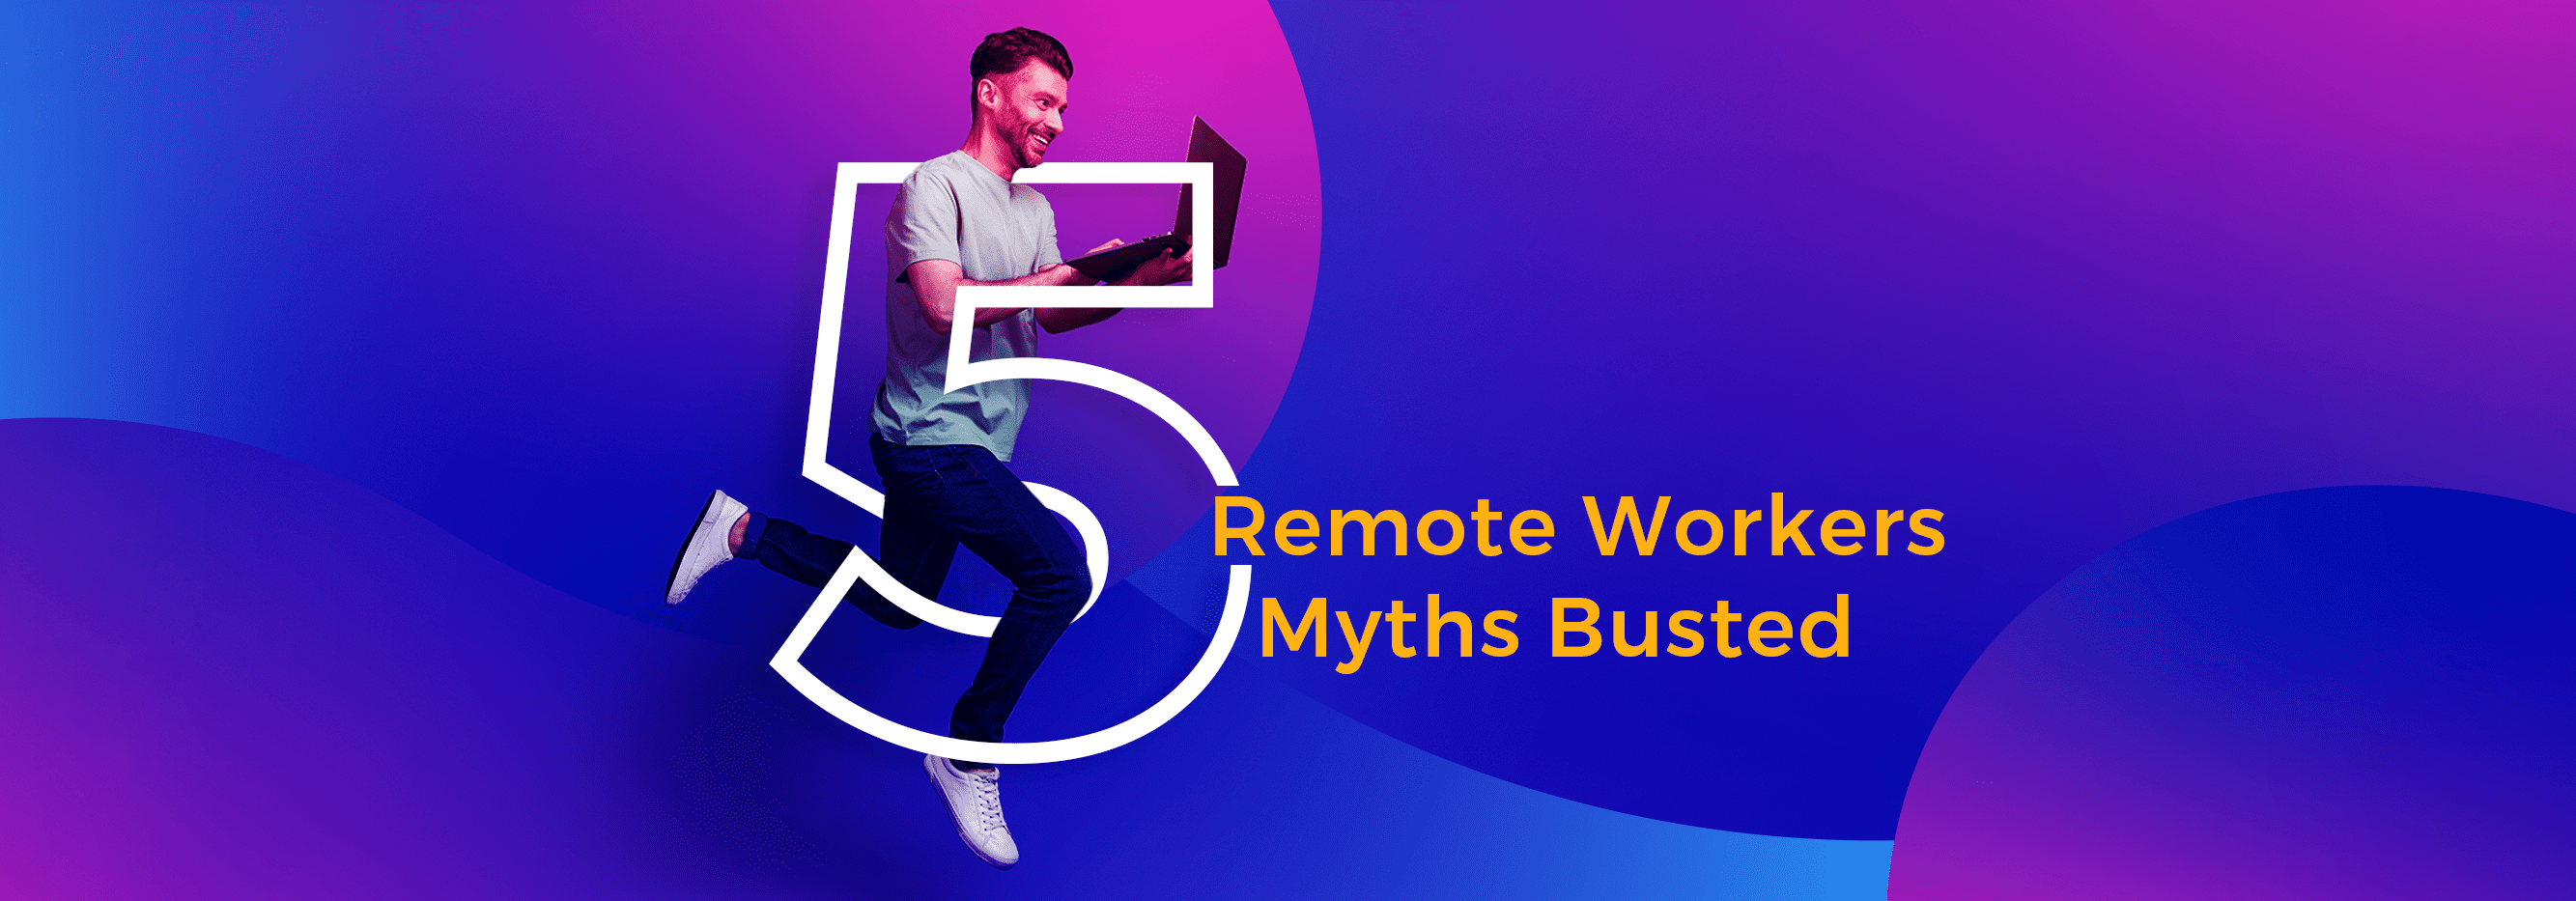 5 Remote Workers Myths Busted_banner